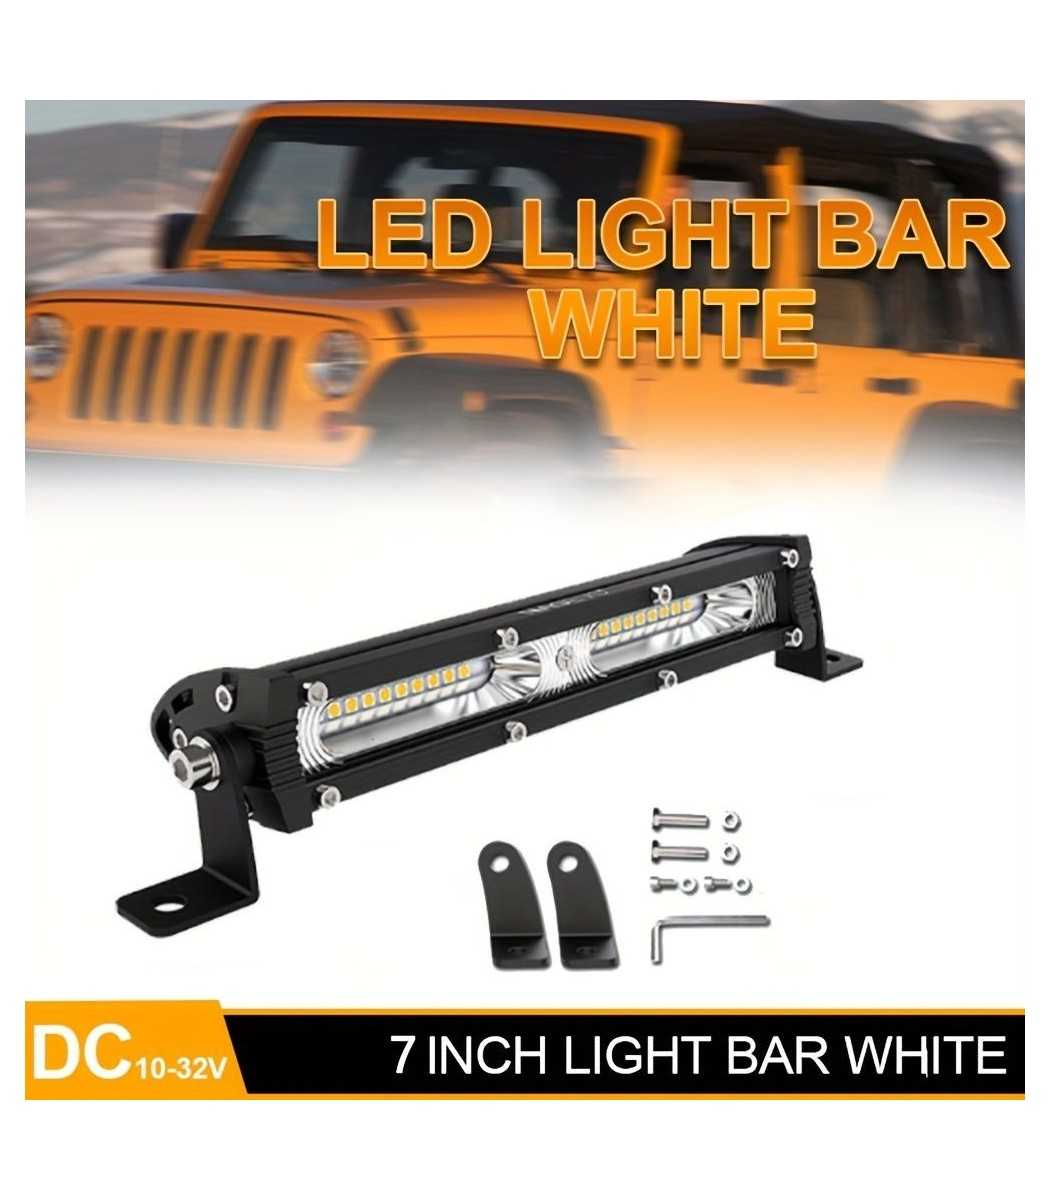 https://electronicroom.eu/44942-large_default/60w-led-bar-work-light-car-accessories-off-road-4x4-offroad-24v-12v-motorcycle-driving-lights-auto-accessorie-ledbar-truck.jpg